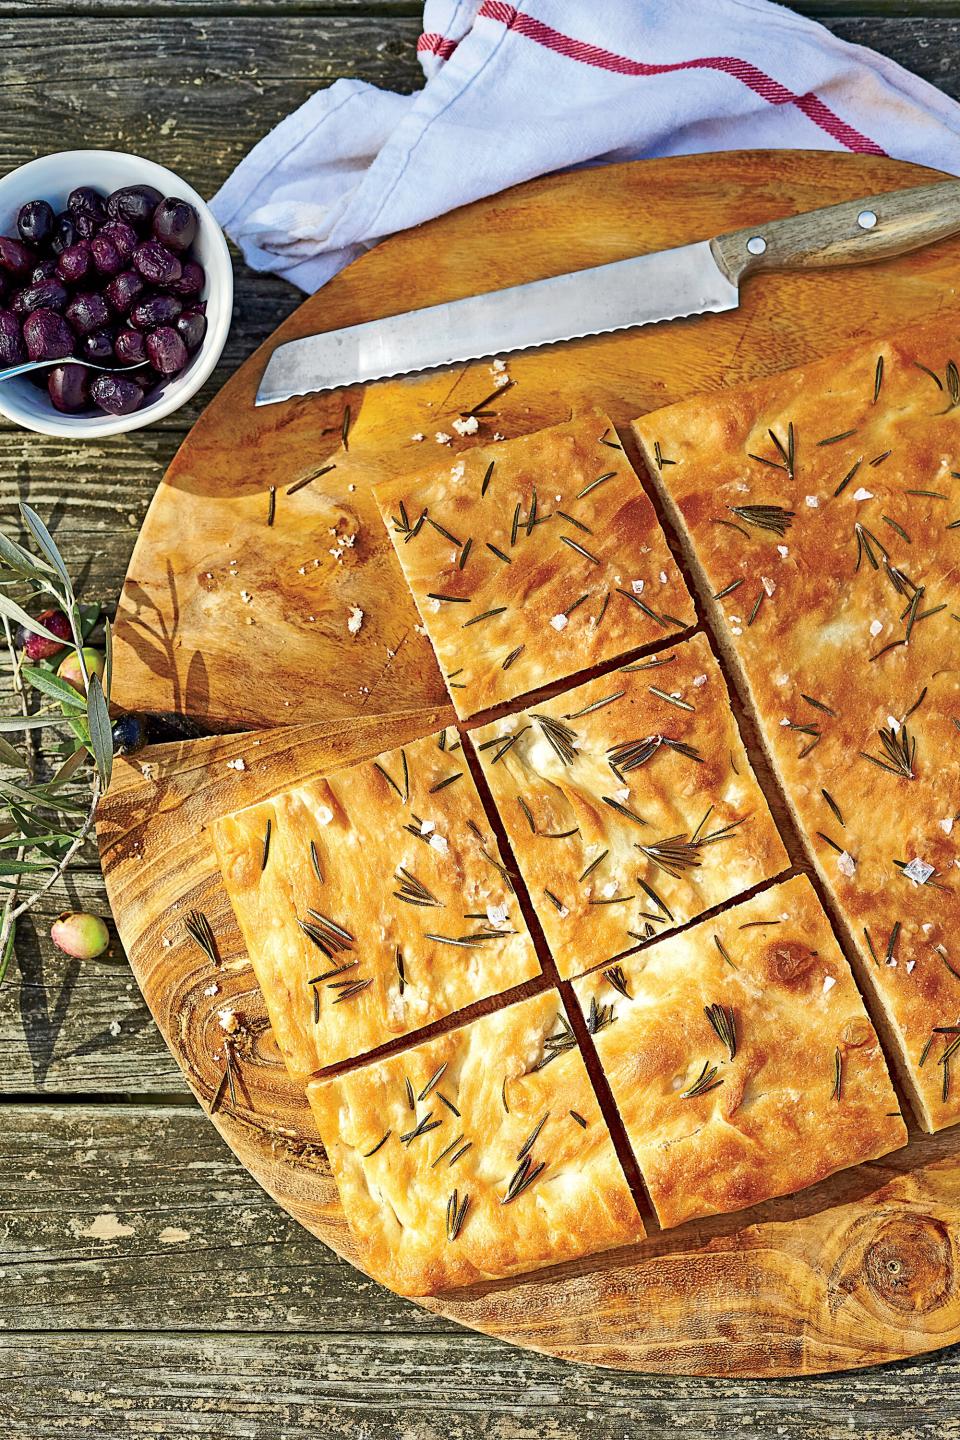 Rosemary Focaccia with Stewed Grapes and Olives